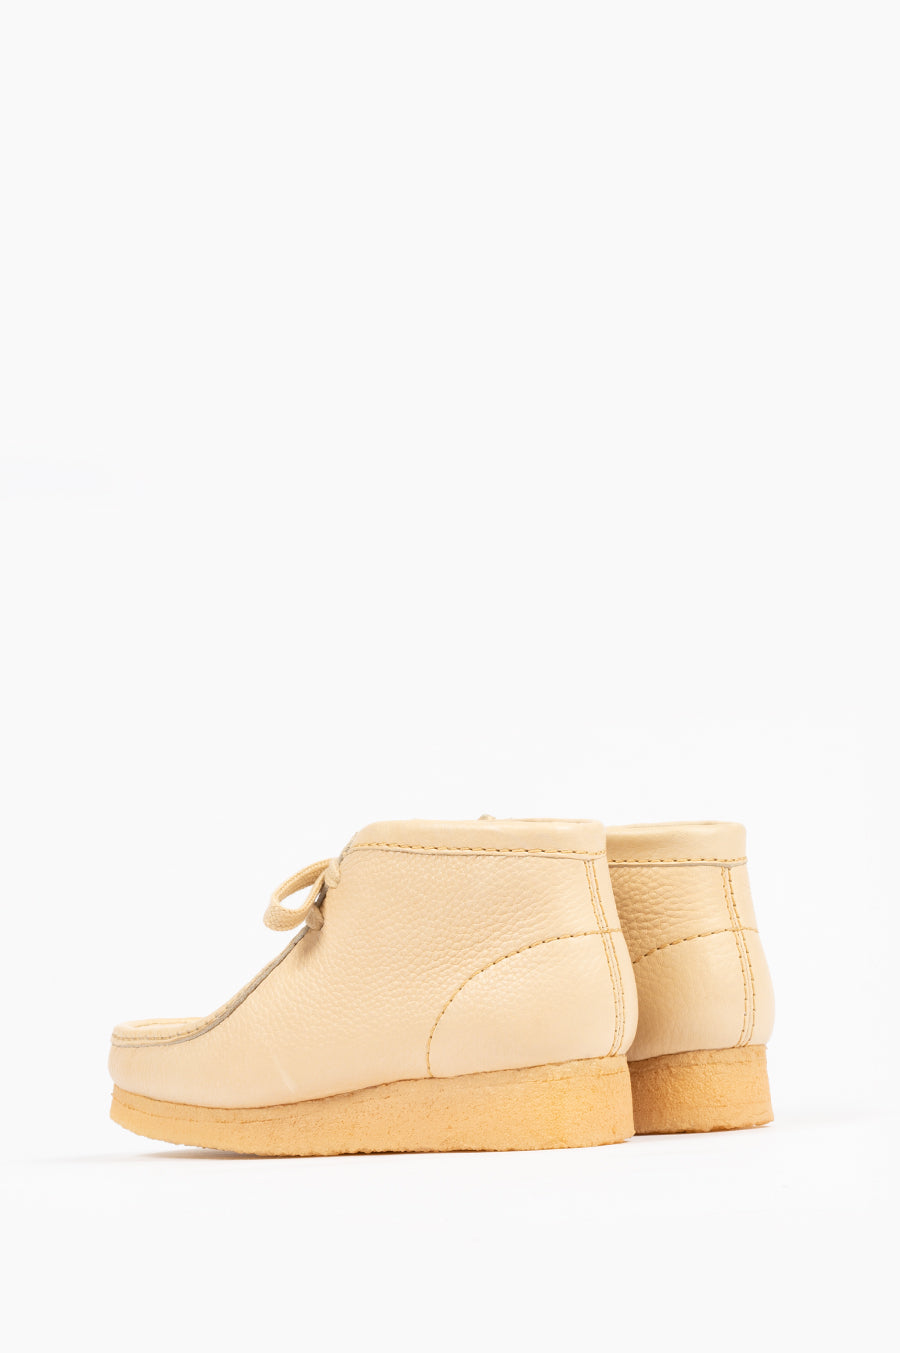 CLARKS X SPORTY & RICH WALLABEE BOOT CREAM PUFF LEATHER